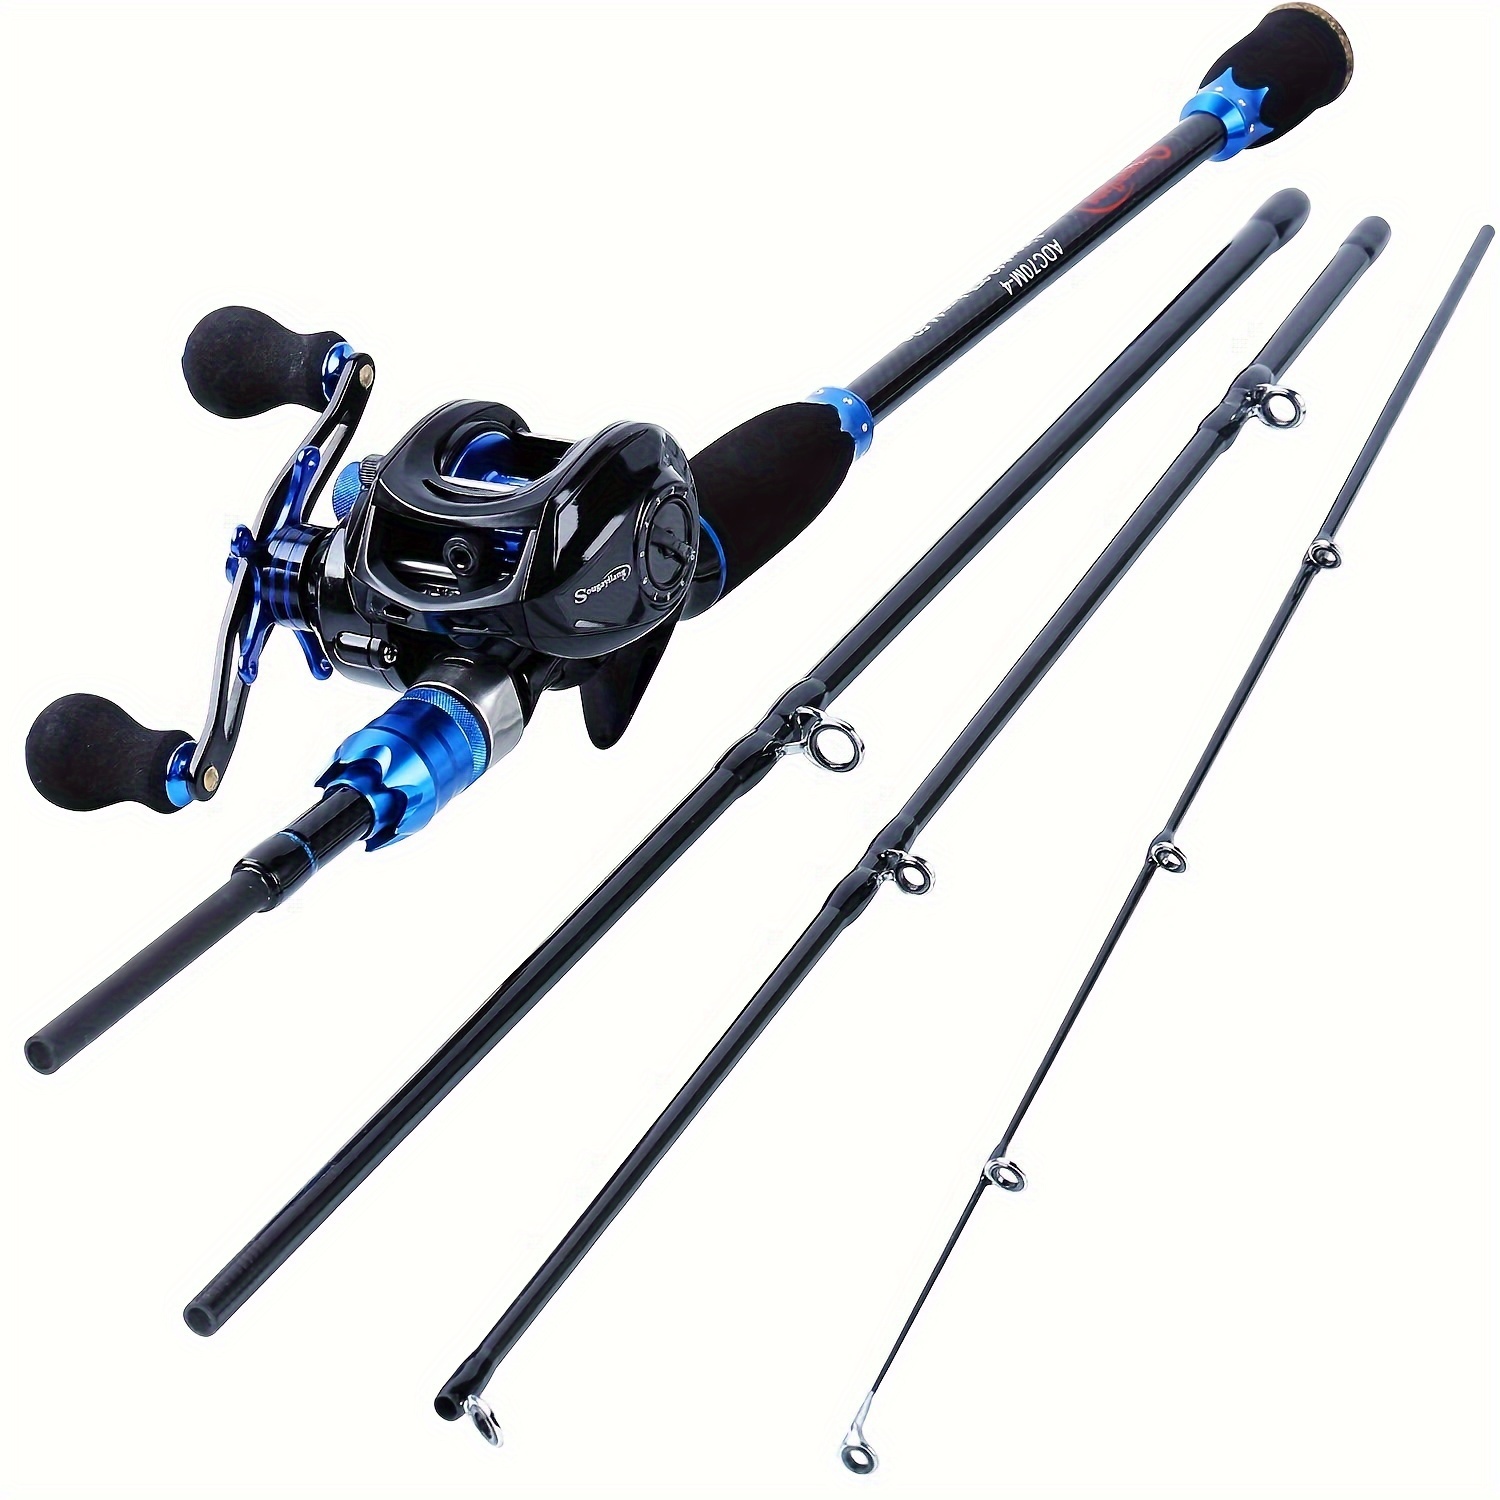 

Sougayilang Fishing Rod And Reel Combos 24-ton Carbon Fiber Fishing Poles With Baitcasting Reel 7.0:1 Gear For Travel Freshwater